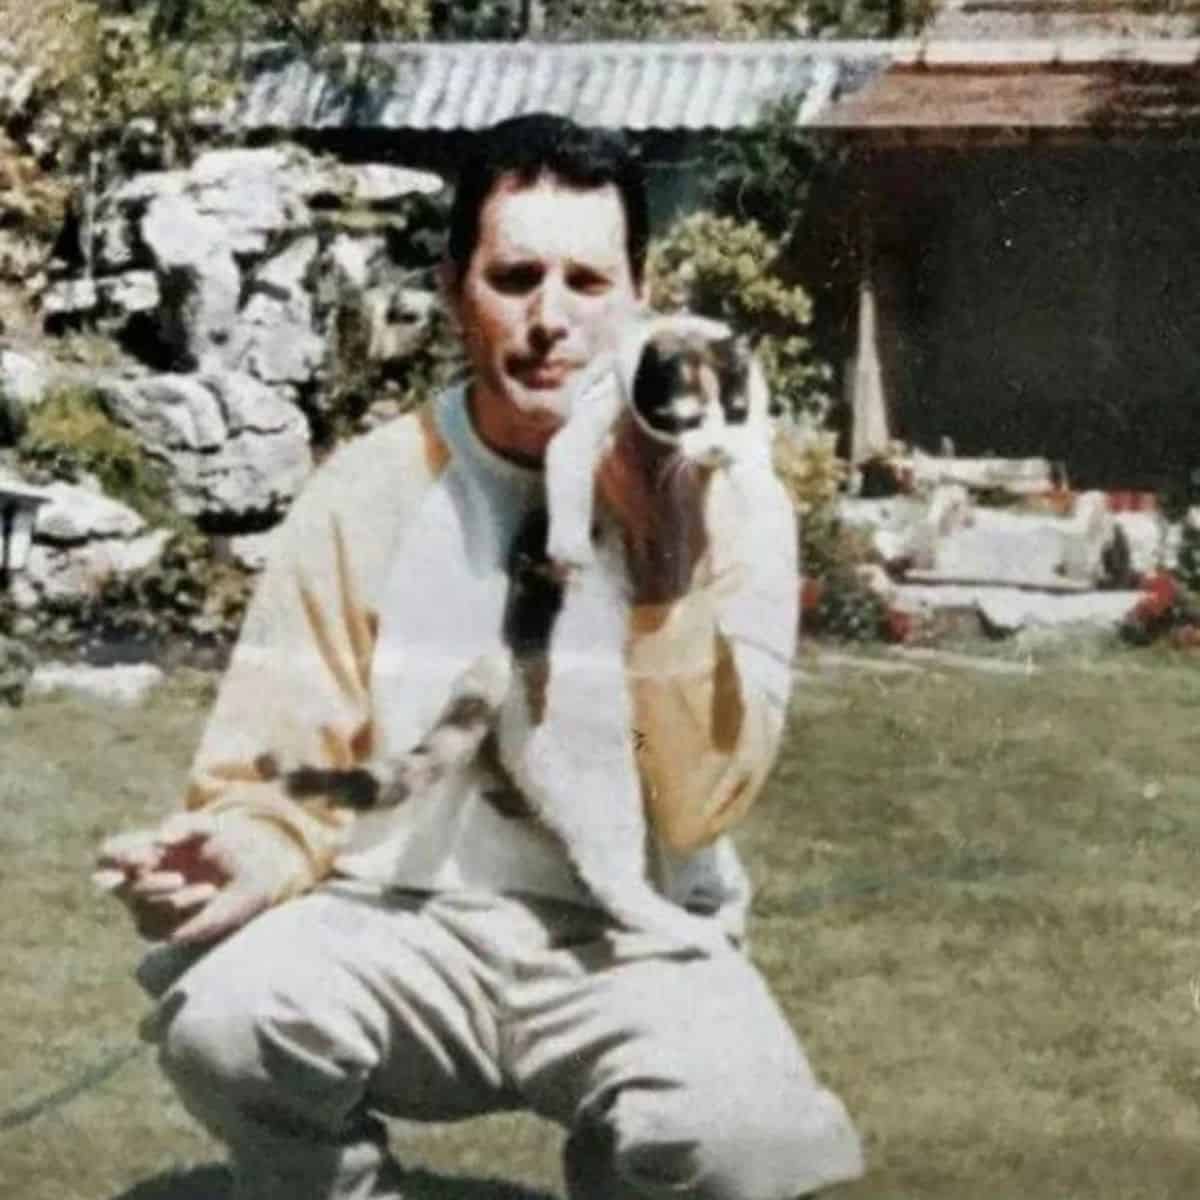 freddie mercury holding the cat with one hand